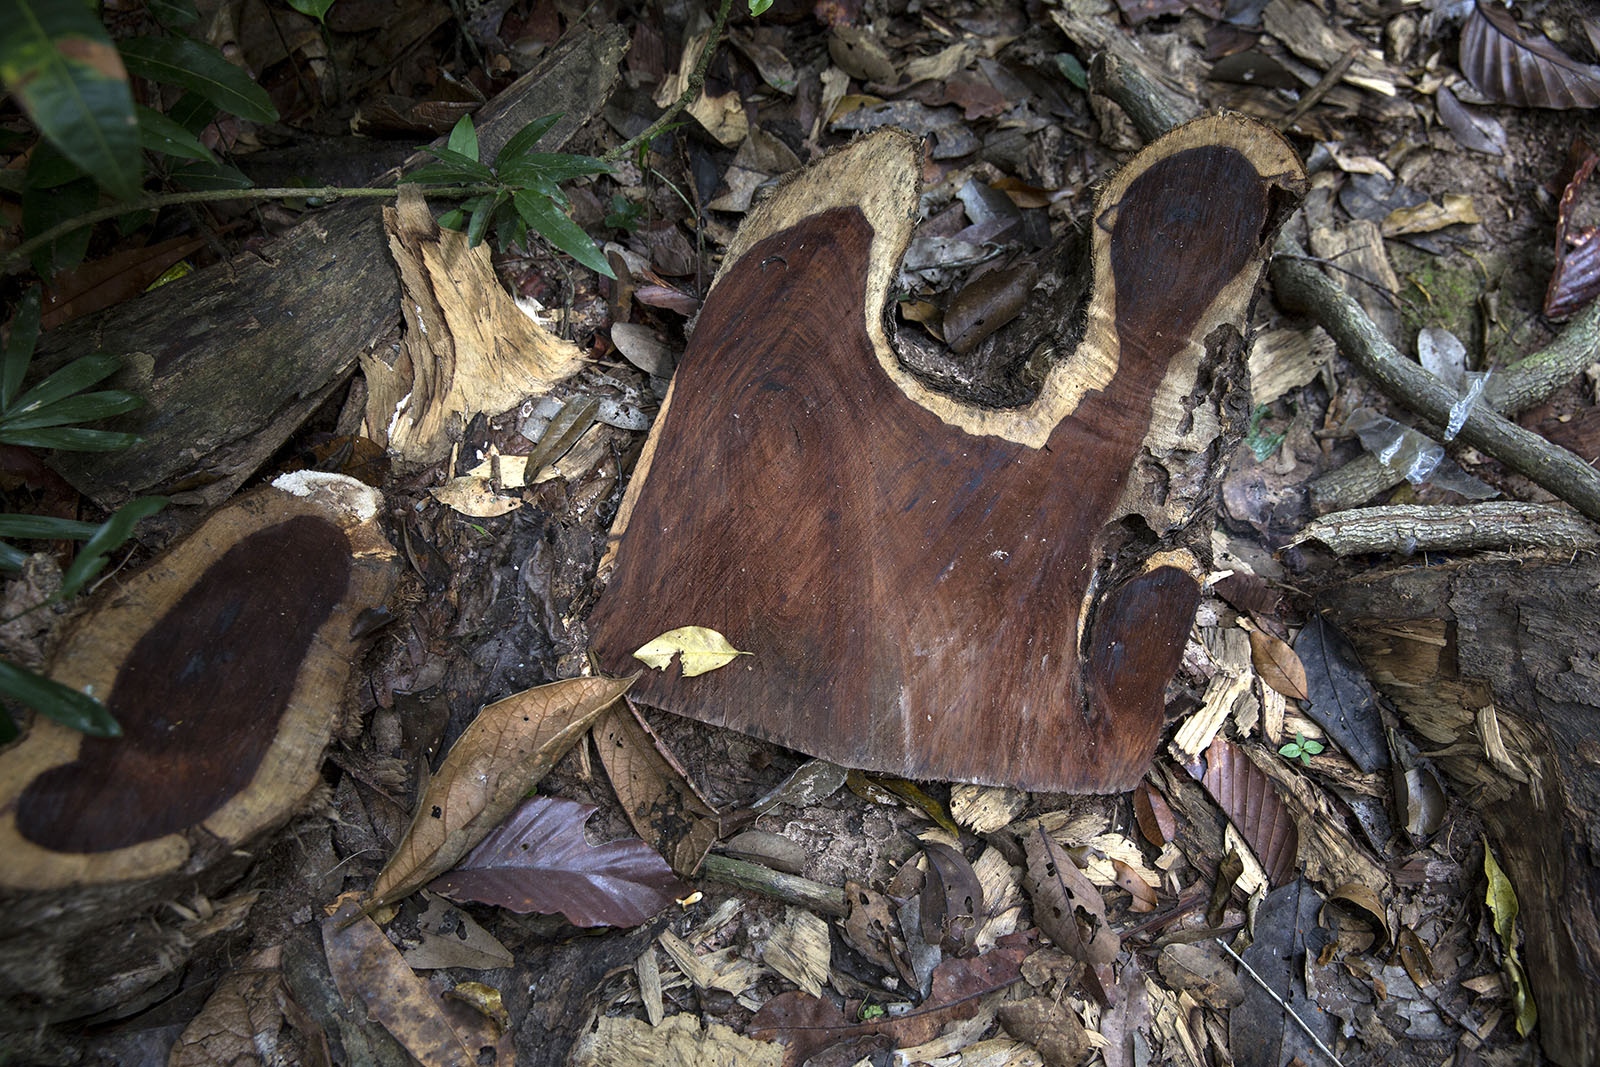 PROTECTING THAILANDS ROSEWOOD - A piece of rosewood discarded by Cambodian loggers before...